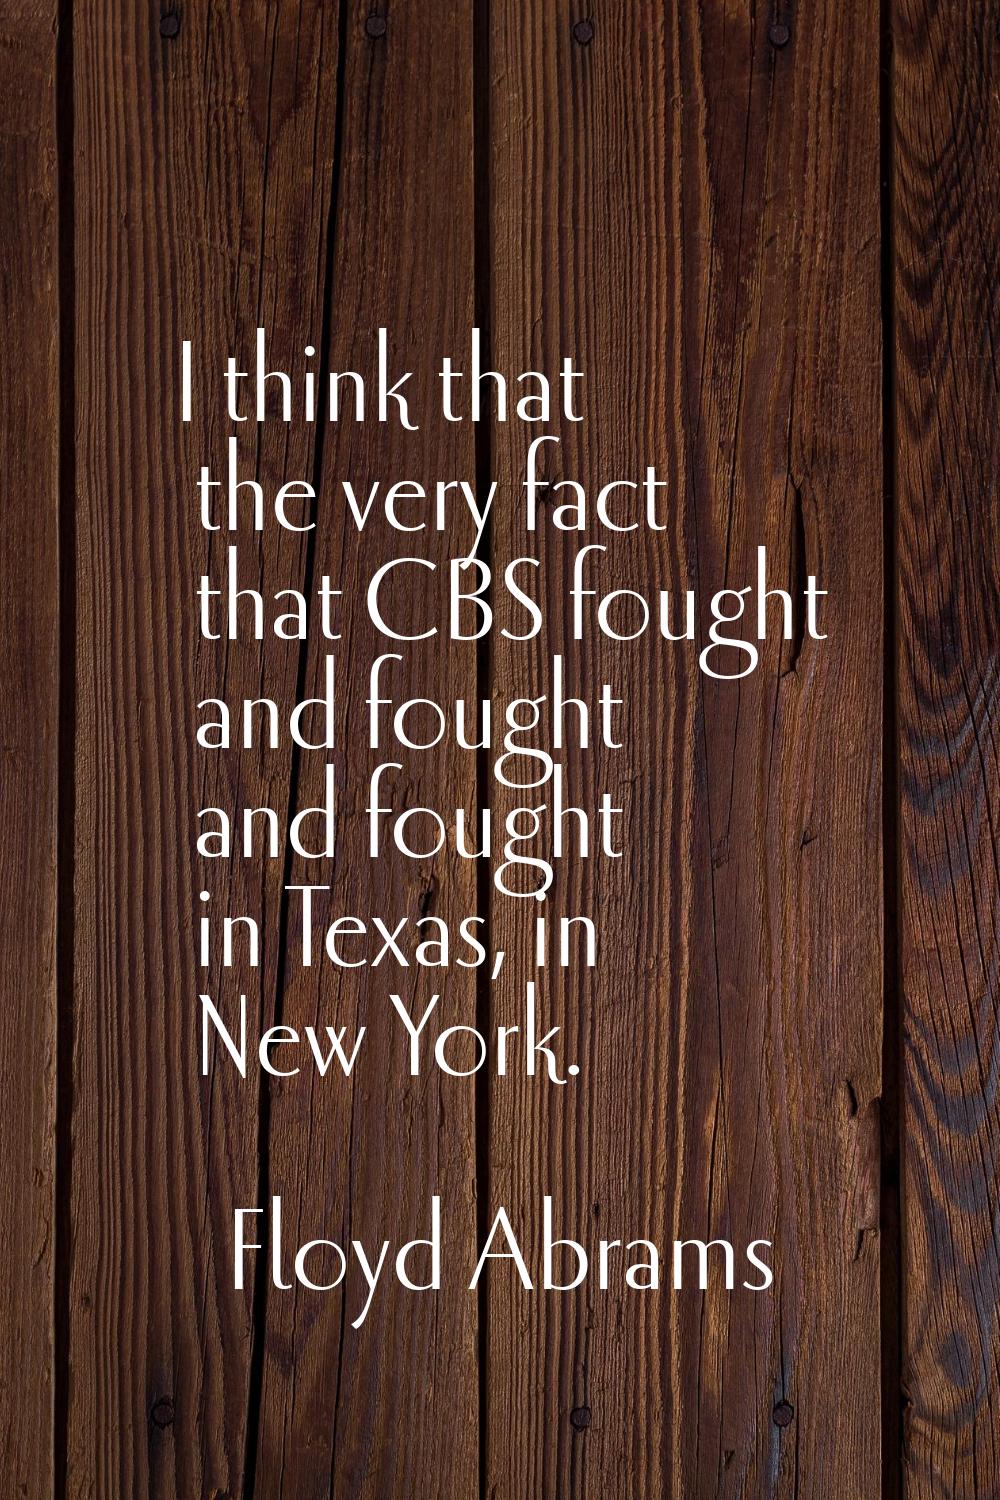 I think that the very fact that CBS fought and fought and fought in Texas, in New York.